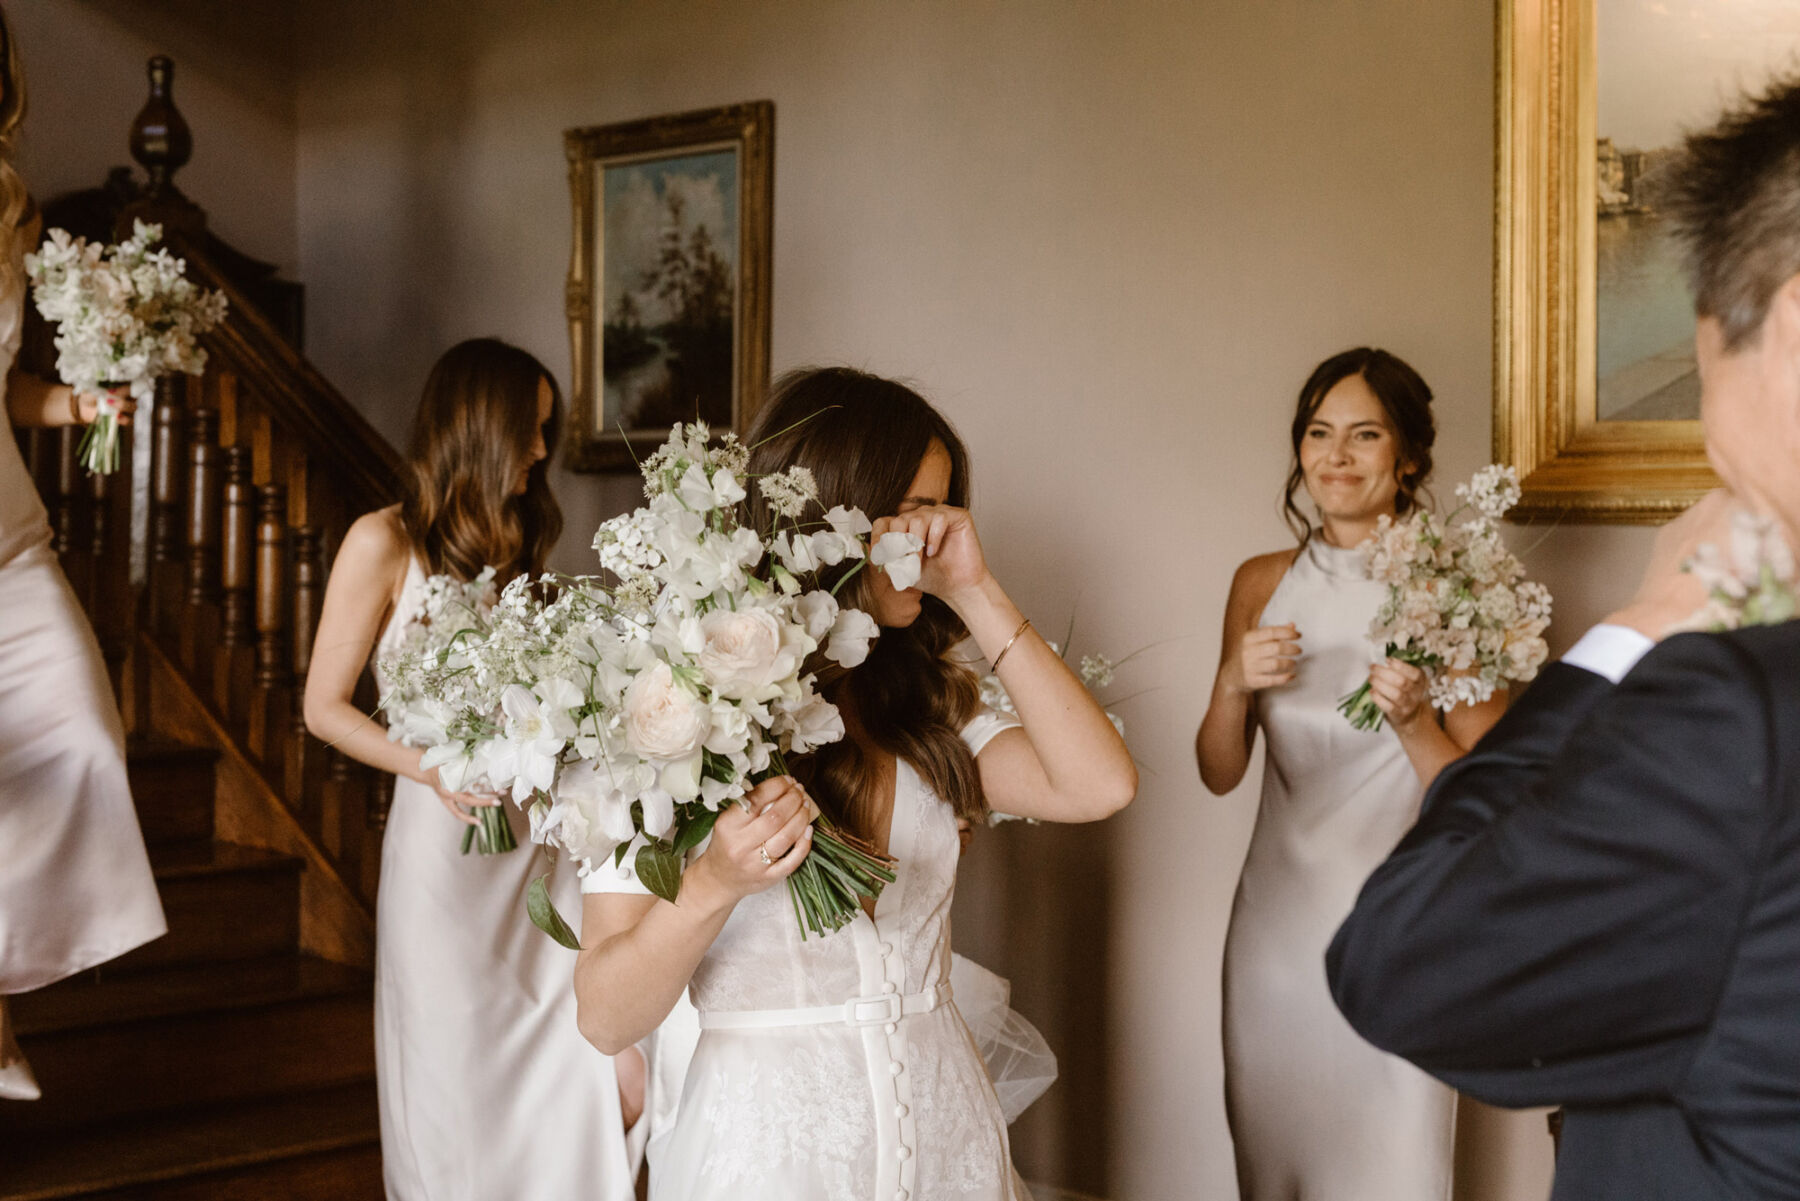 Bride wiping away tears - holding a white and pale pink bridal bouquet. Agnes Black Photography.